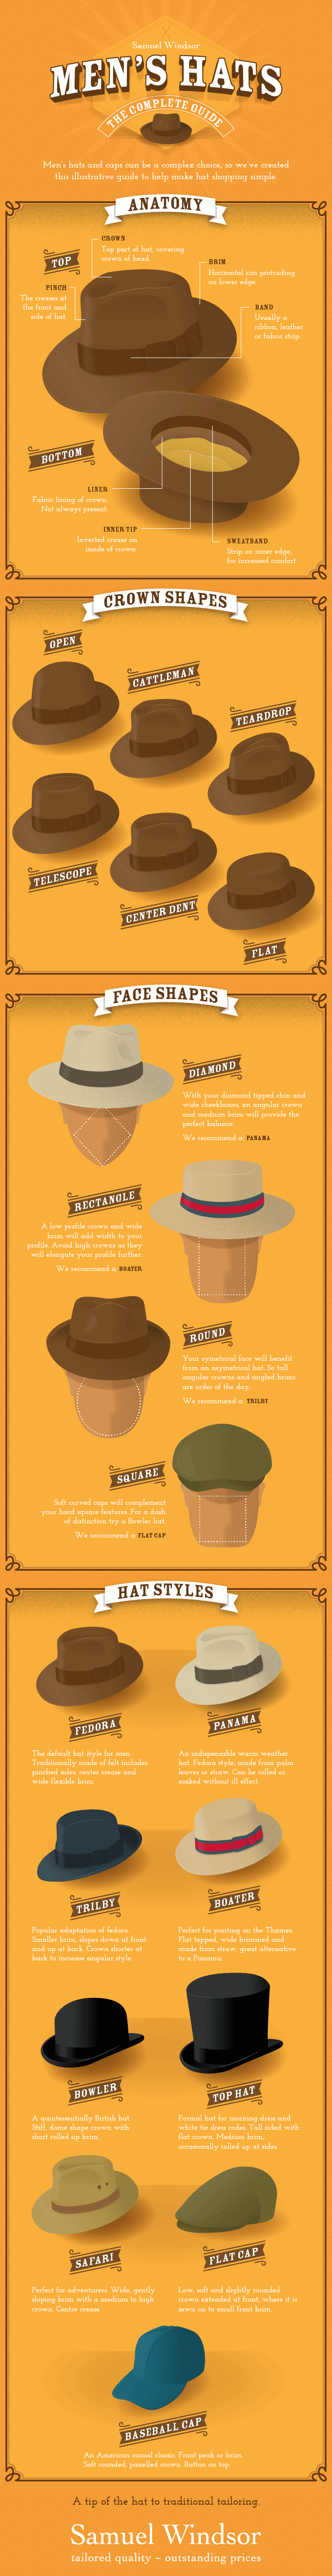 Men's Hats - The Complete Guide infographic